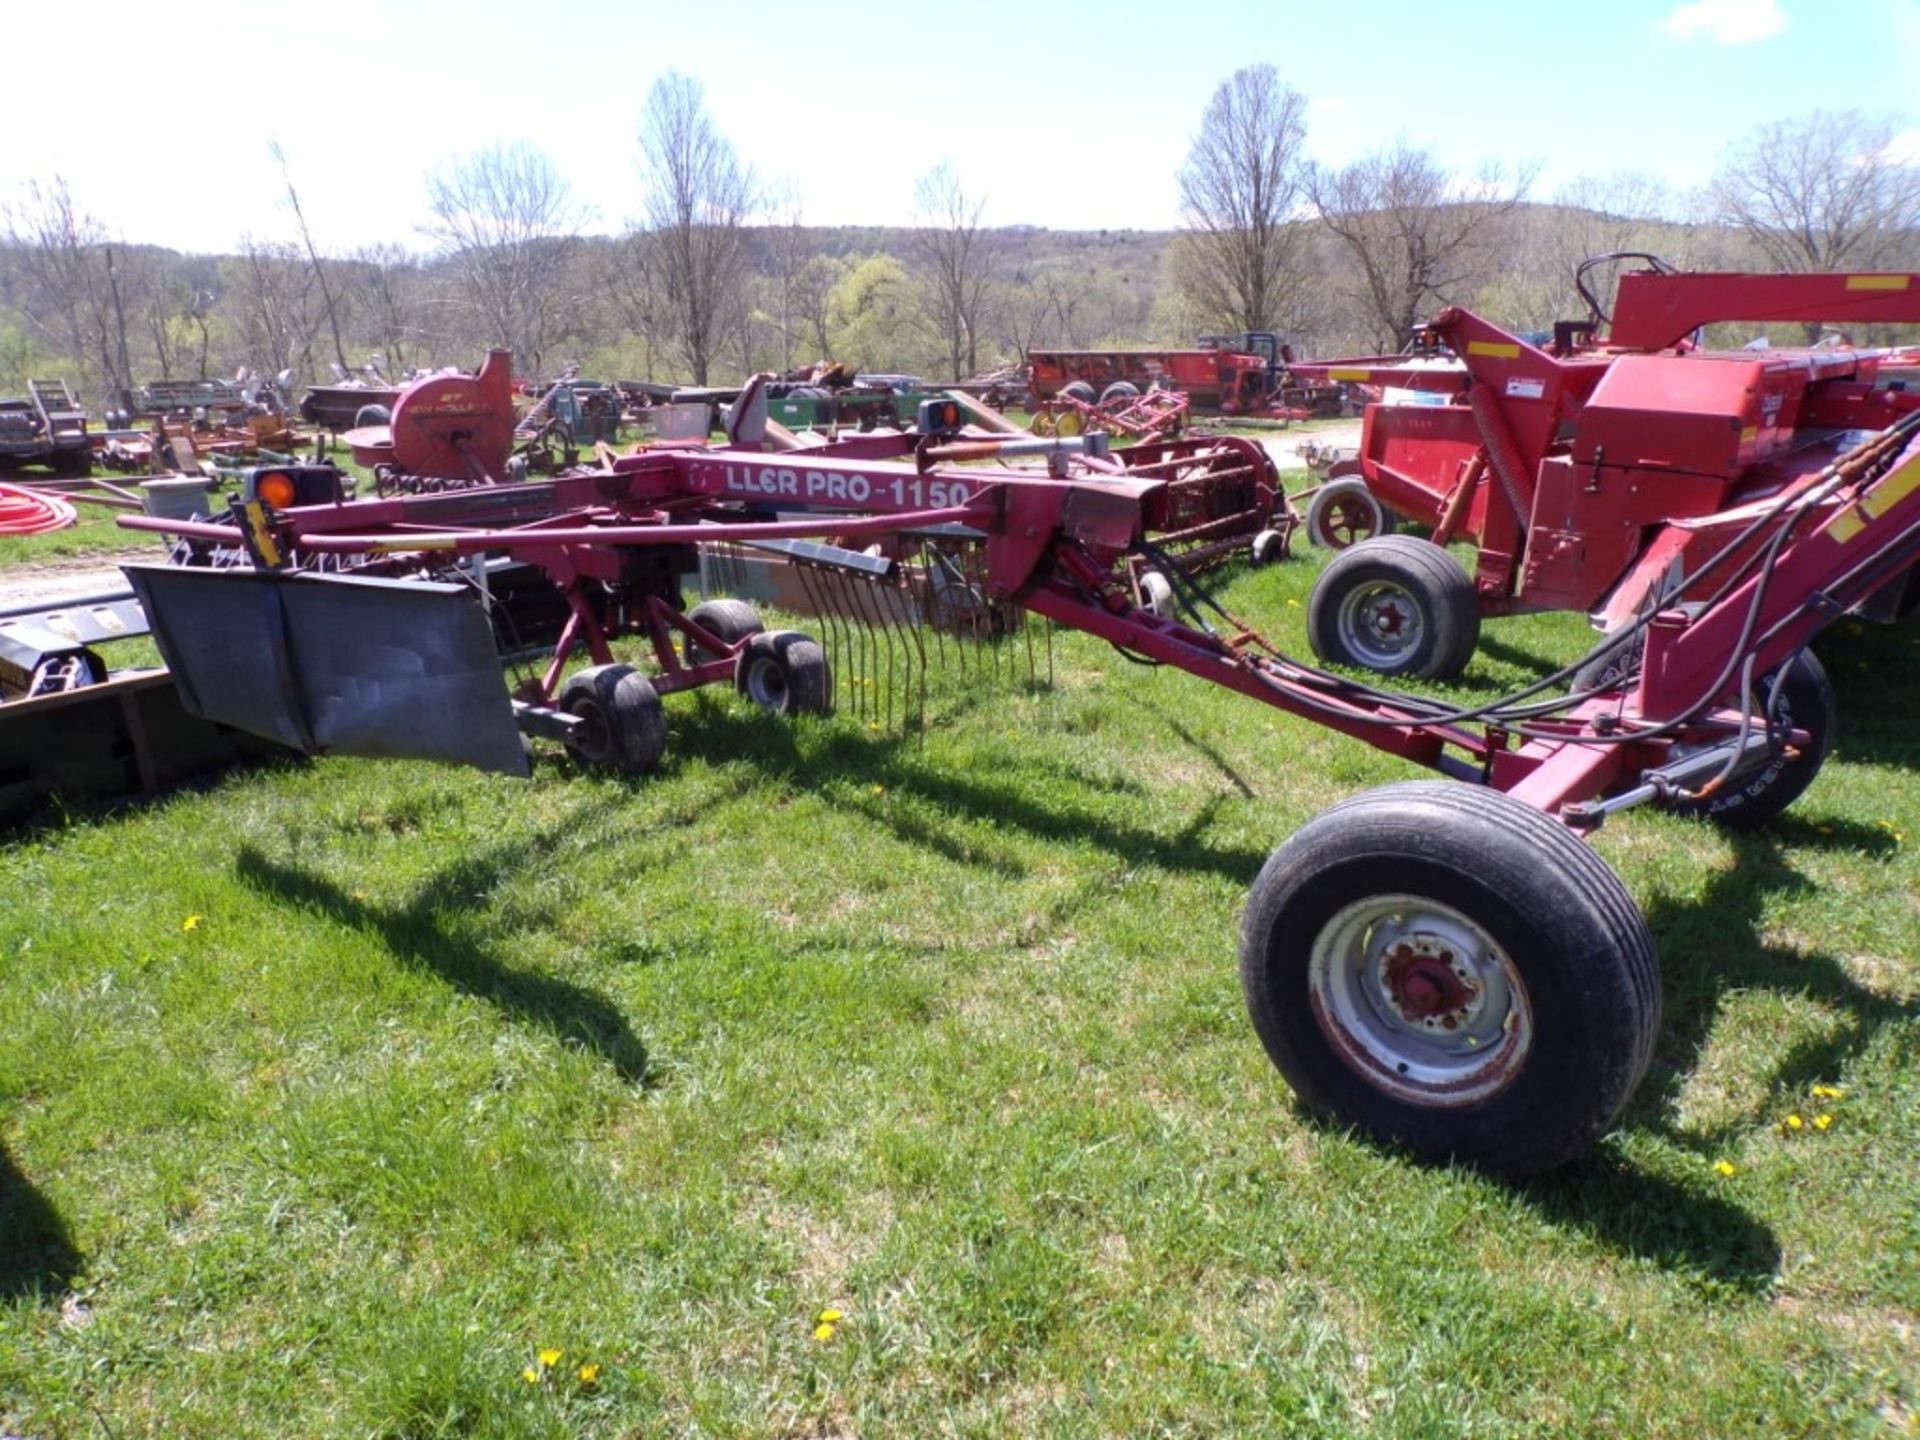 Miller Pro-1150 Tandem Rotary Rake with 2250 Hitch (5071) - Image 3 of 4